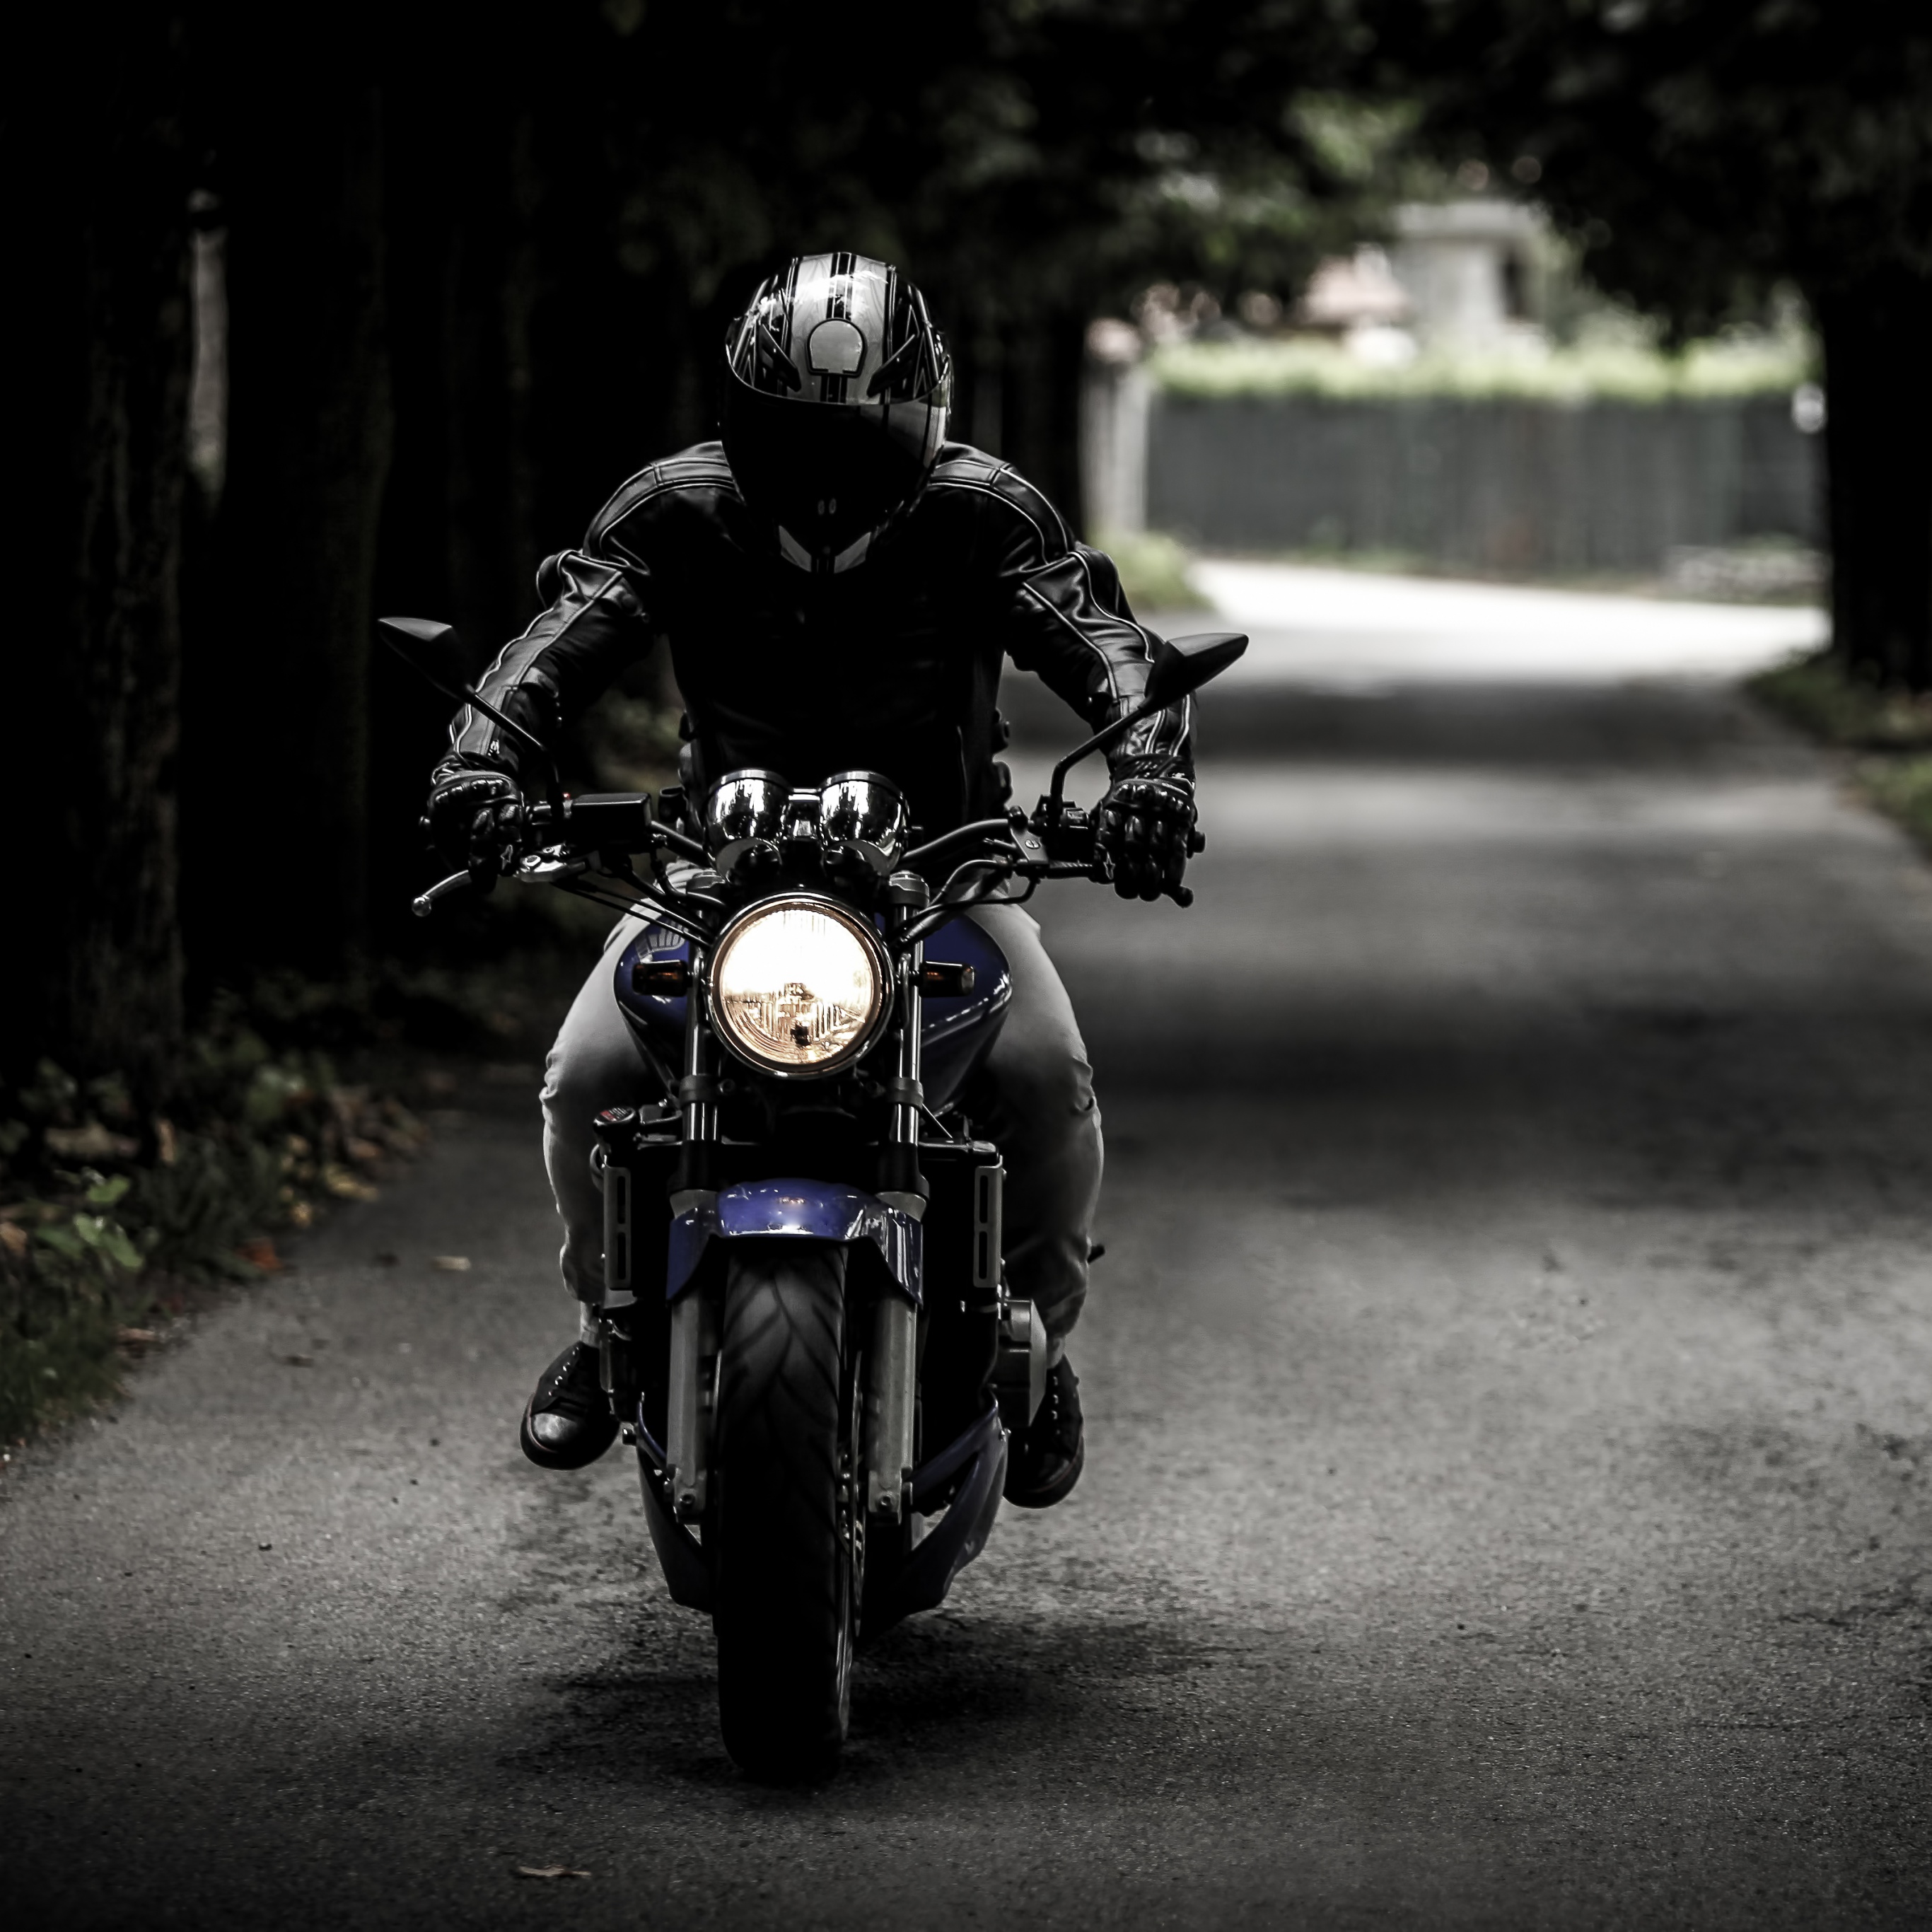 Best 3 Motorcycle Backgrounds for Phones on Hip mobile screen bike HD  phone wallpaper  Pxfuel